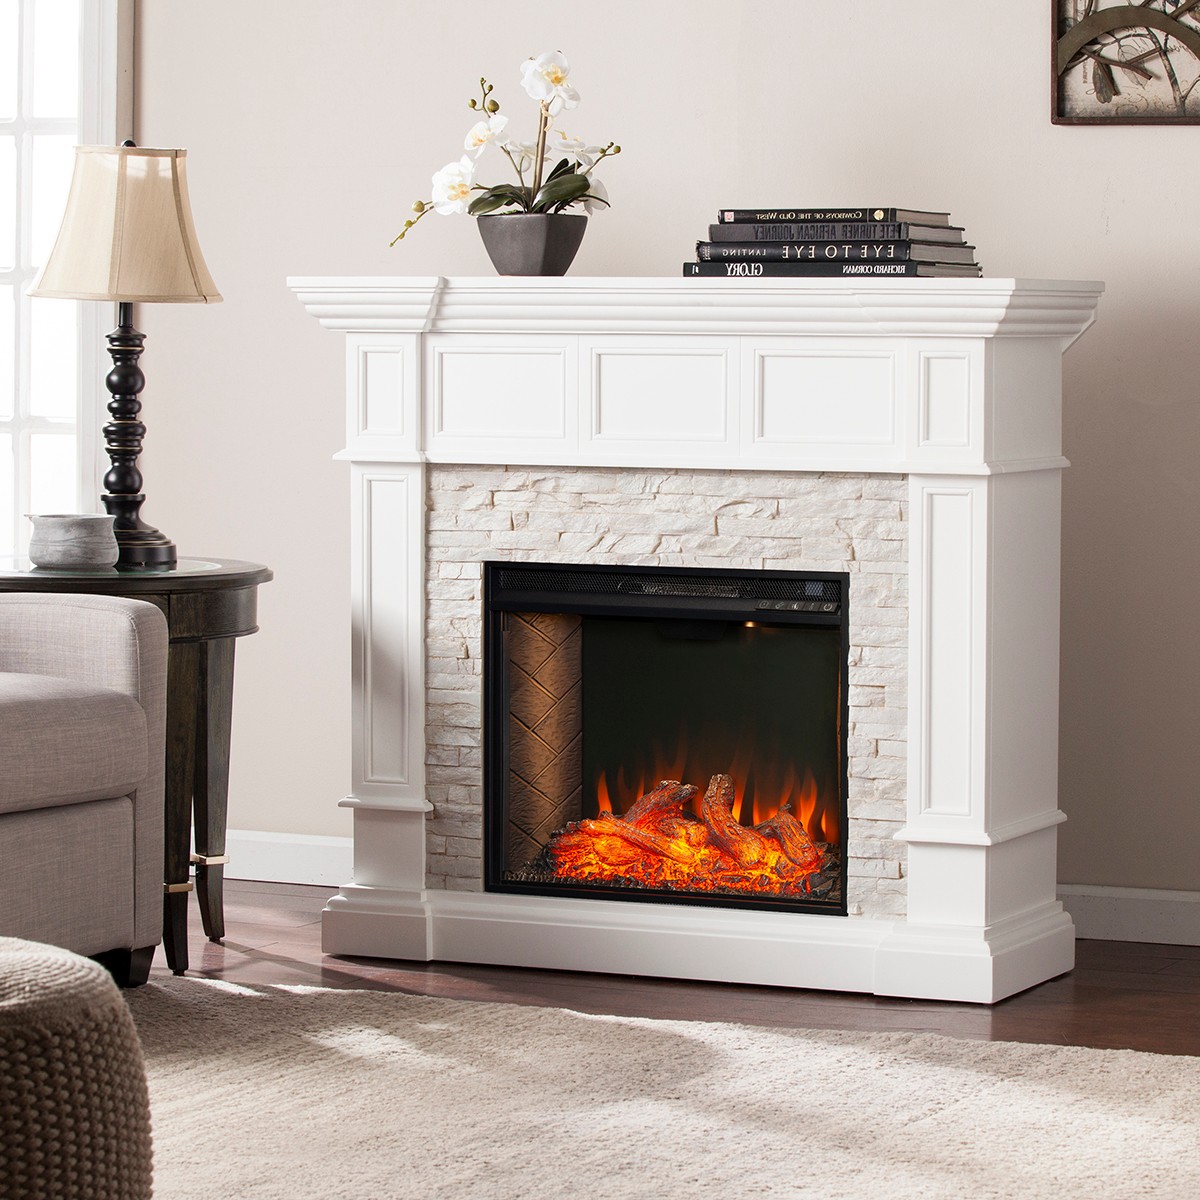 30 Inch Electric Fireplace Lovely southern Enterprises Merrimack Simulated Stone Convertible Electric Fireplace